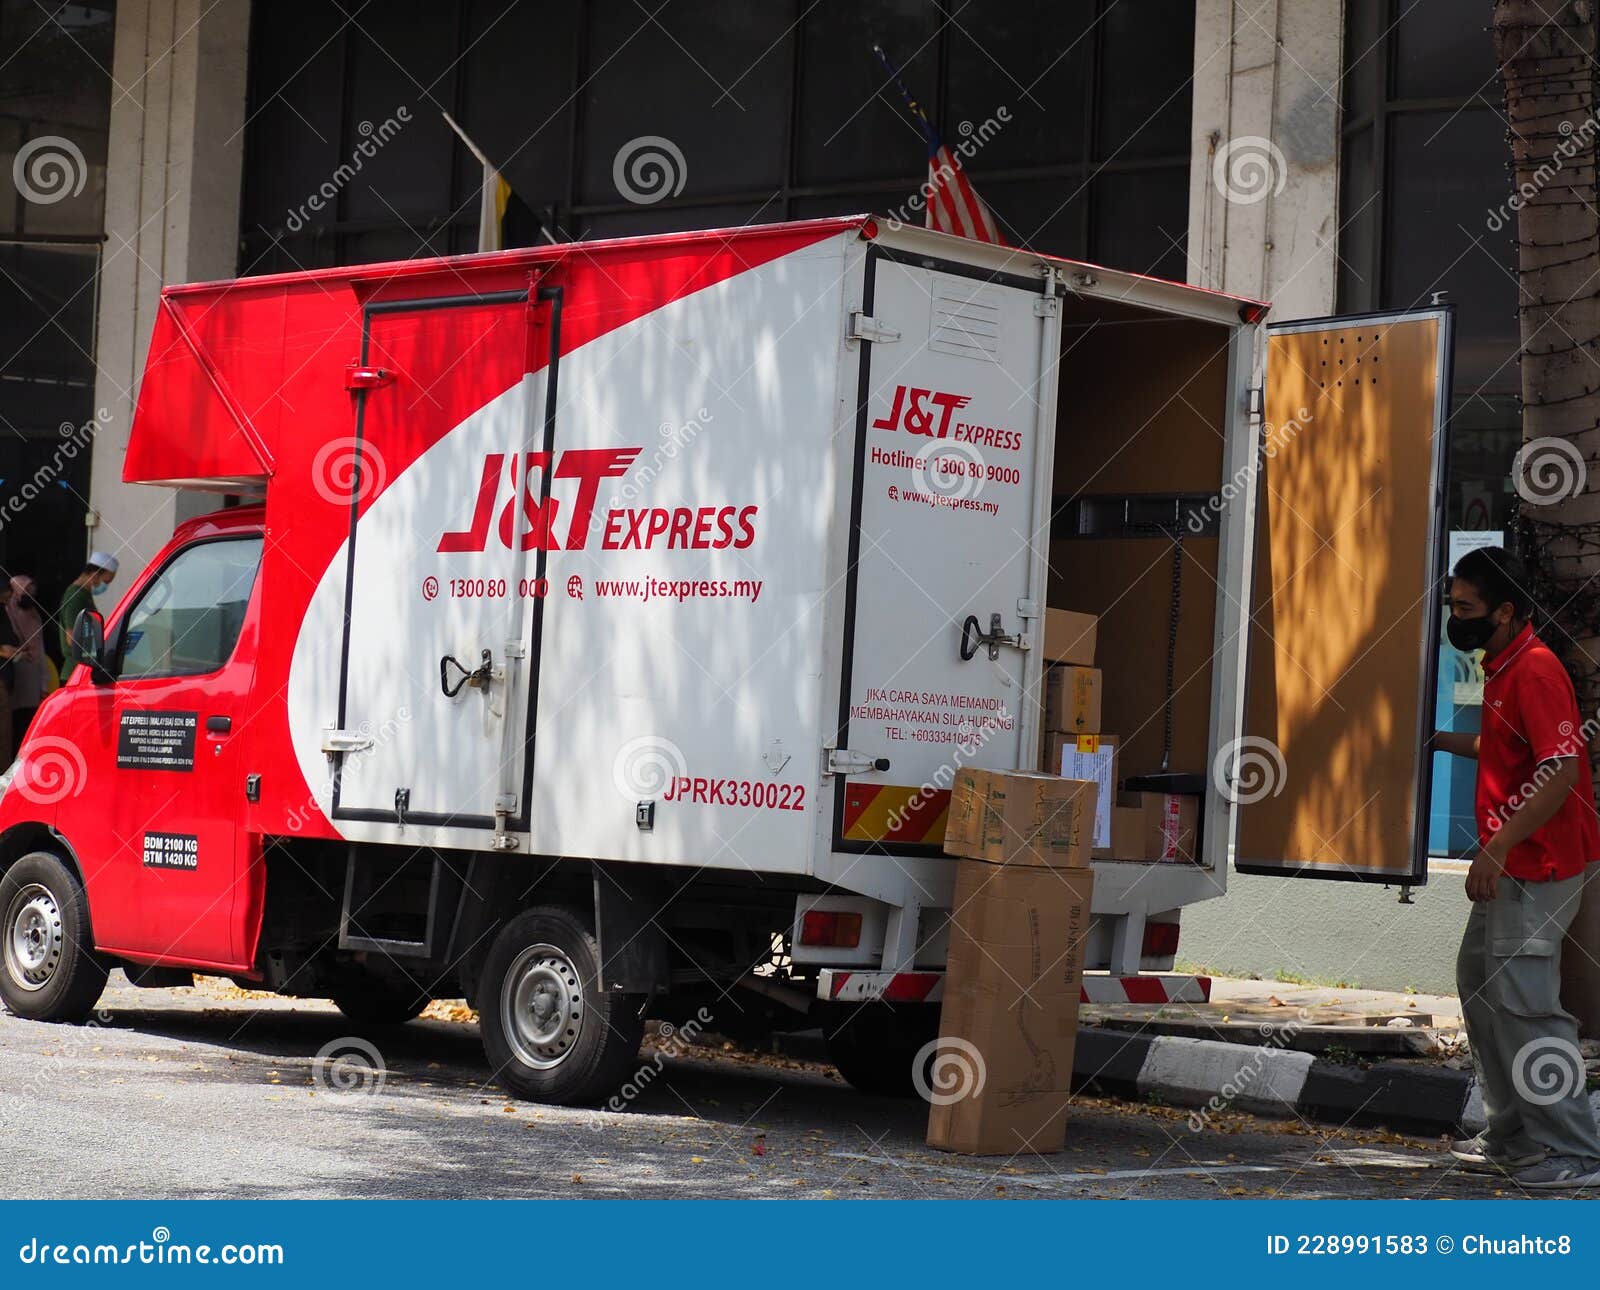 J&t express delivery